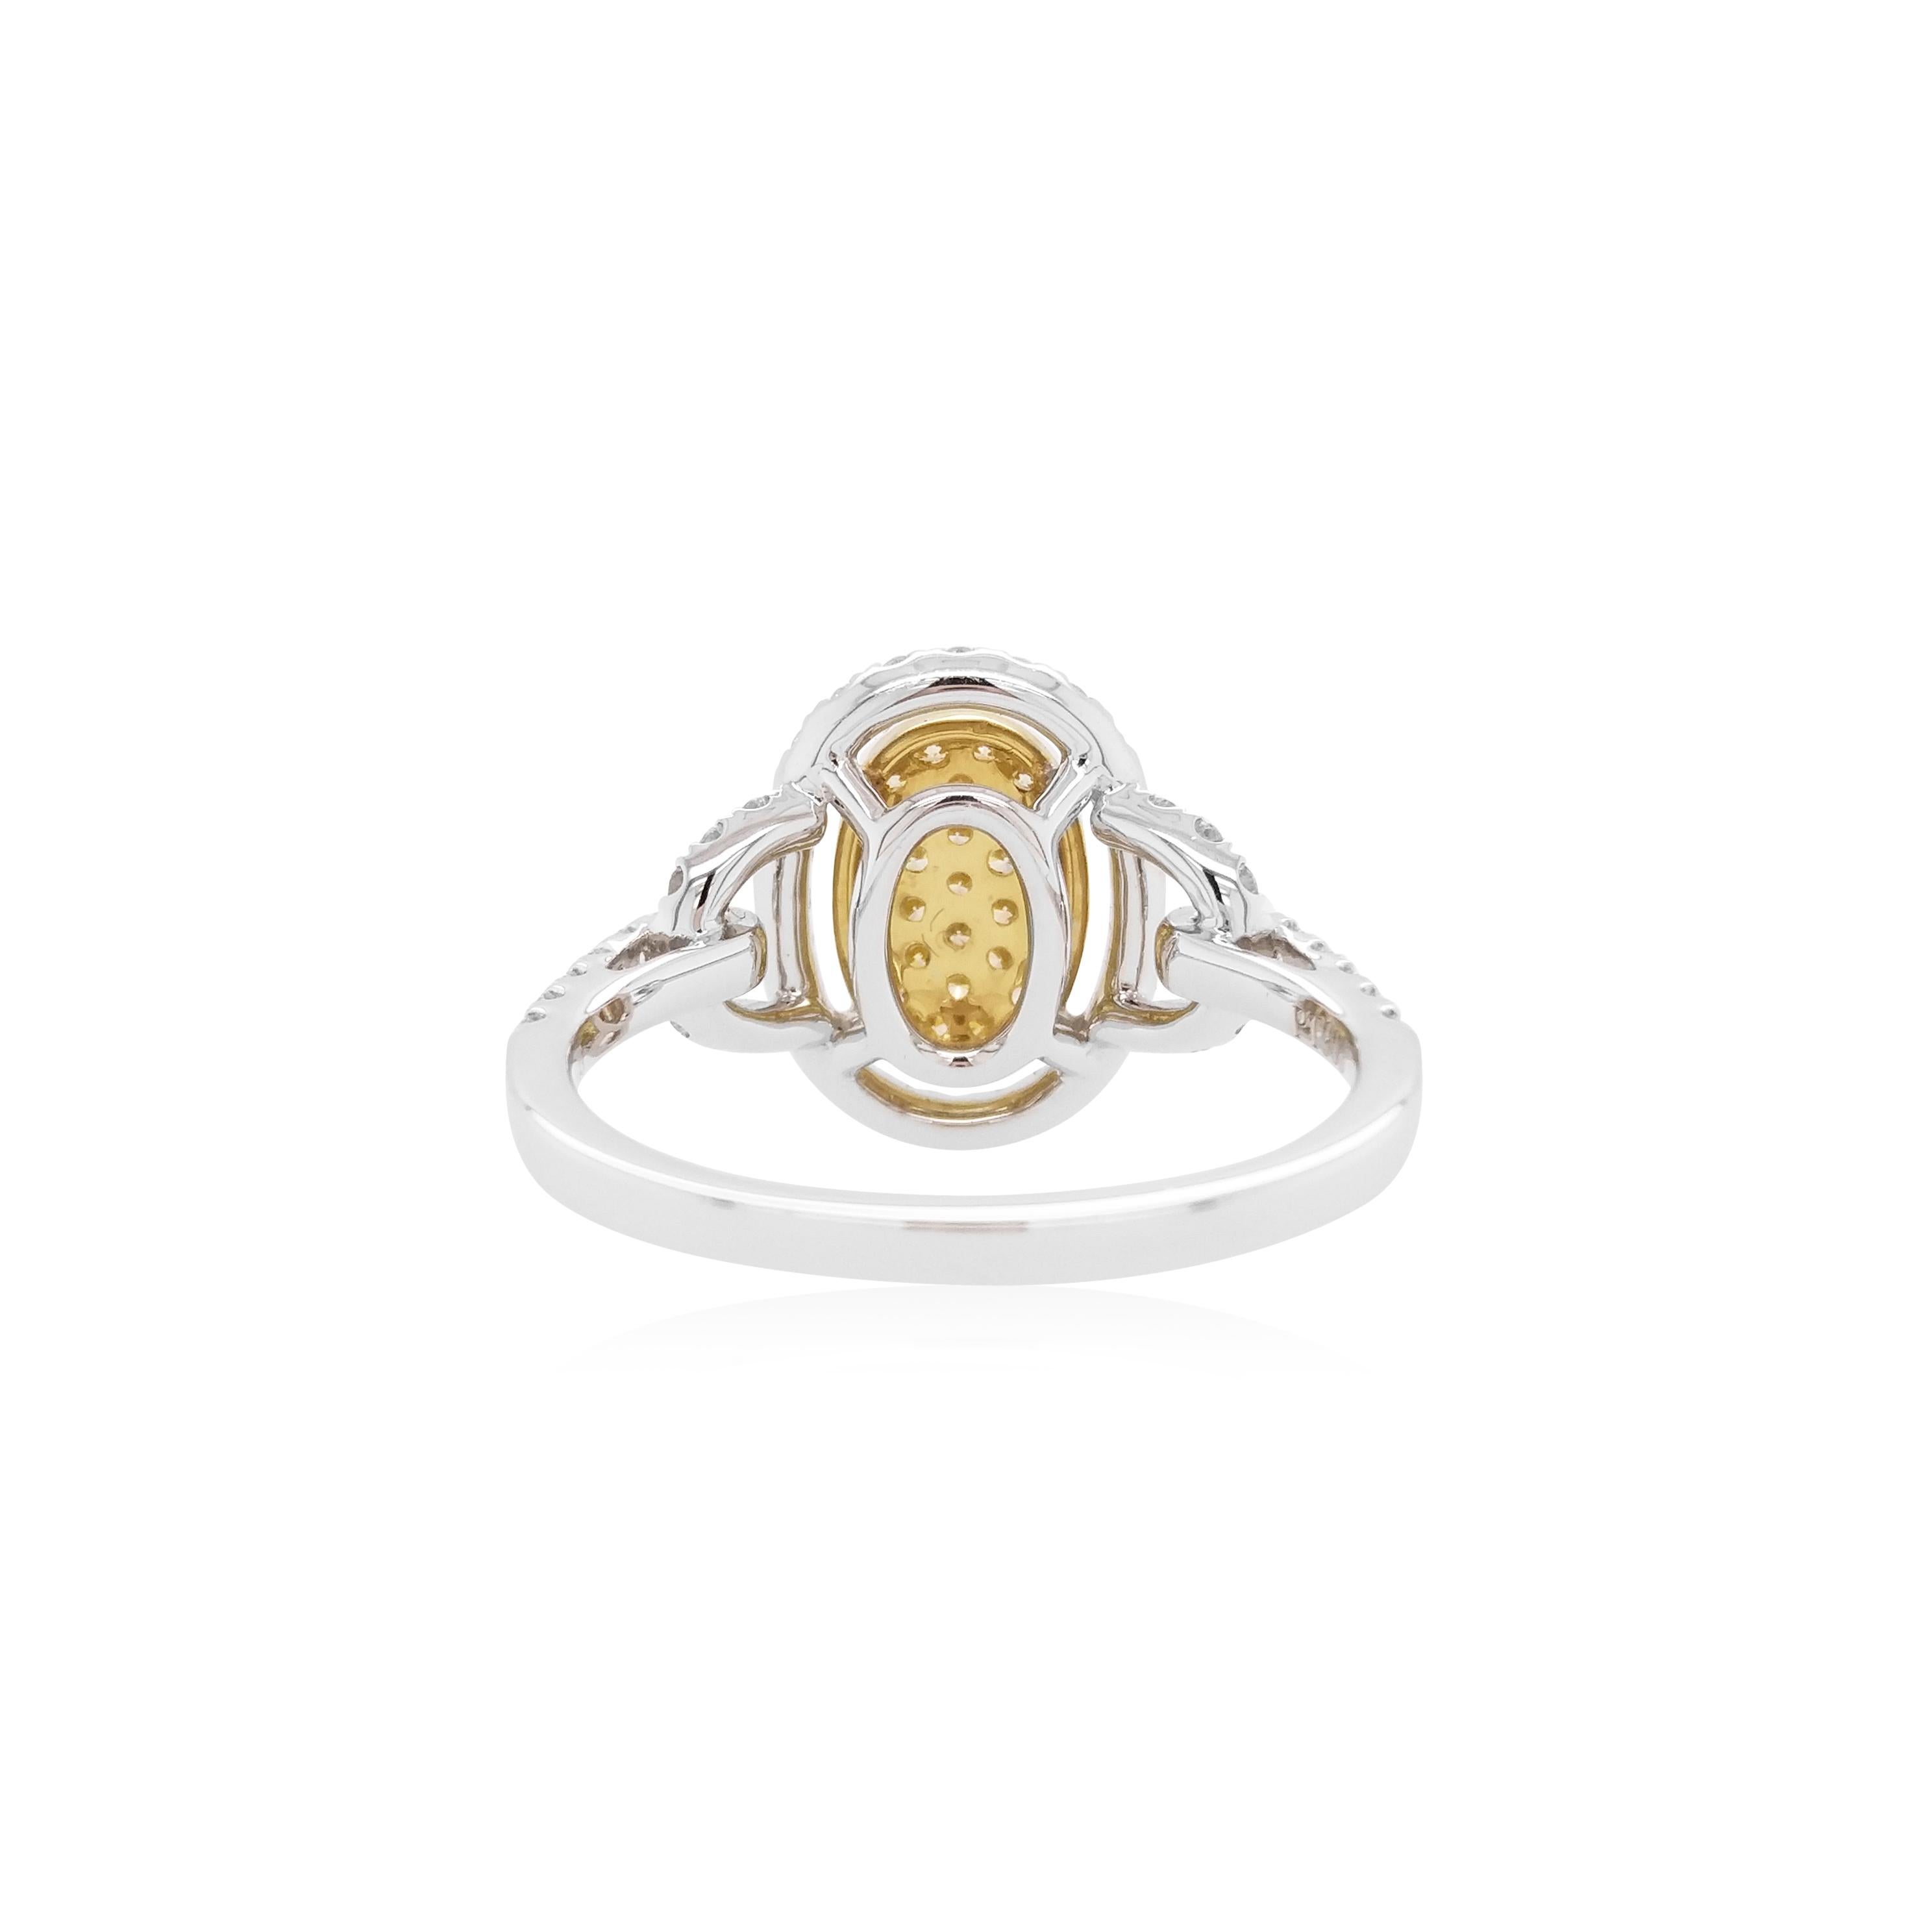 This unique ring features striking natural Yellow diamonds at its forefront, surrounded by a halo of sparkling white diamonds. The perfect piece to take you from day to night, this ring will elevate any outfit - especially when paired with the